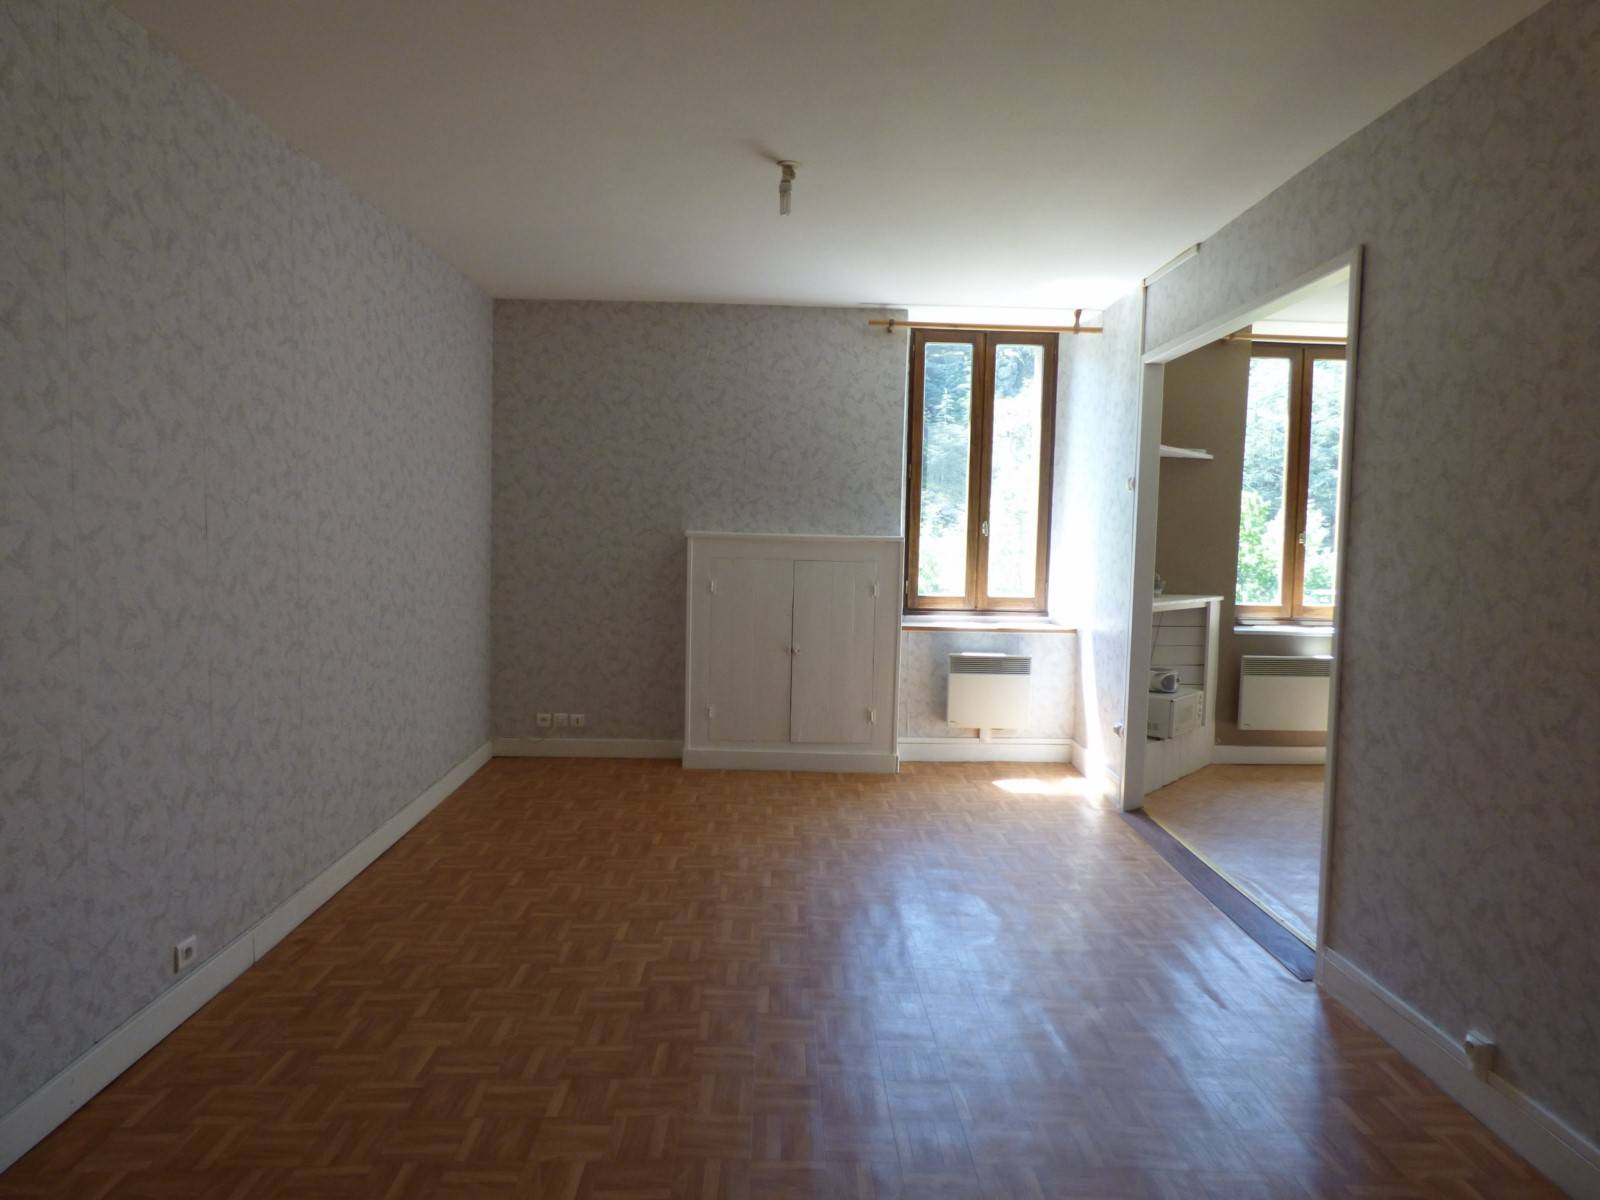  Location  Appartement  T1  DAVEZIEUX EURO SUD IMMO 